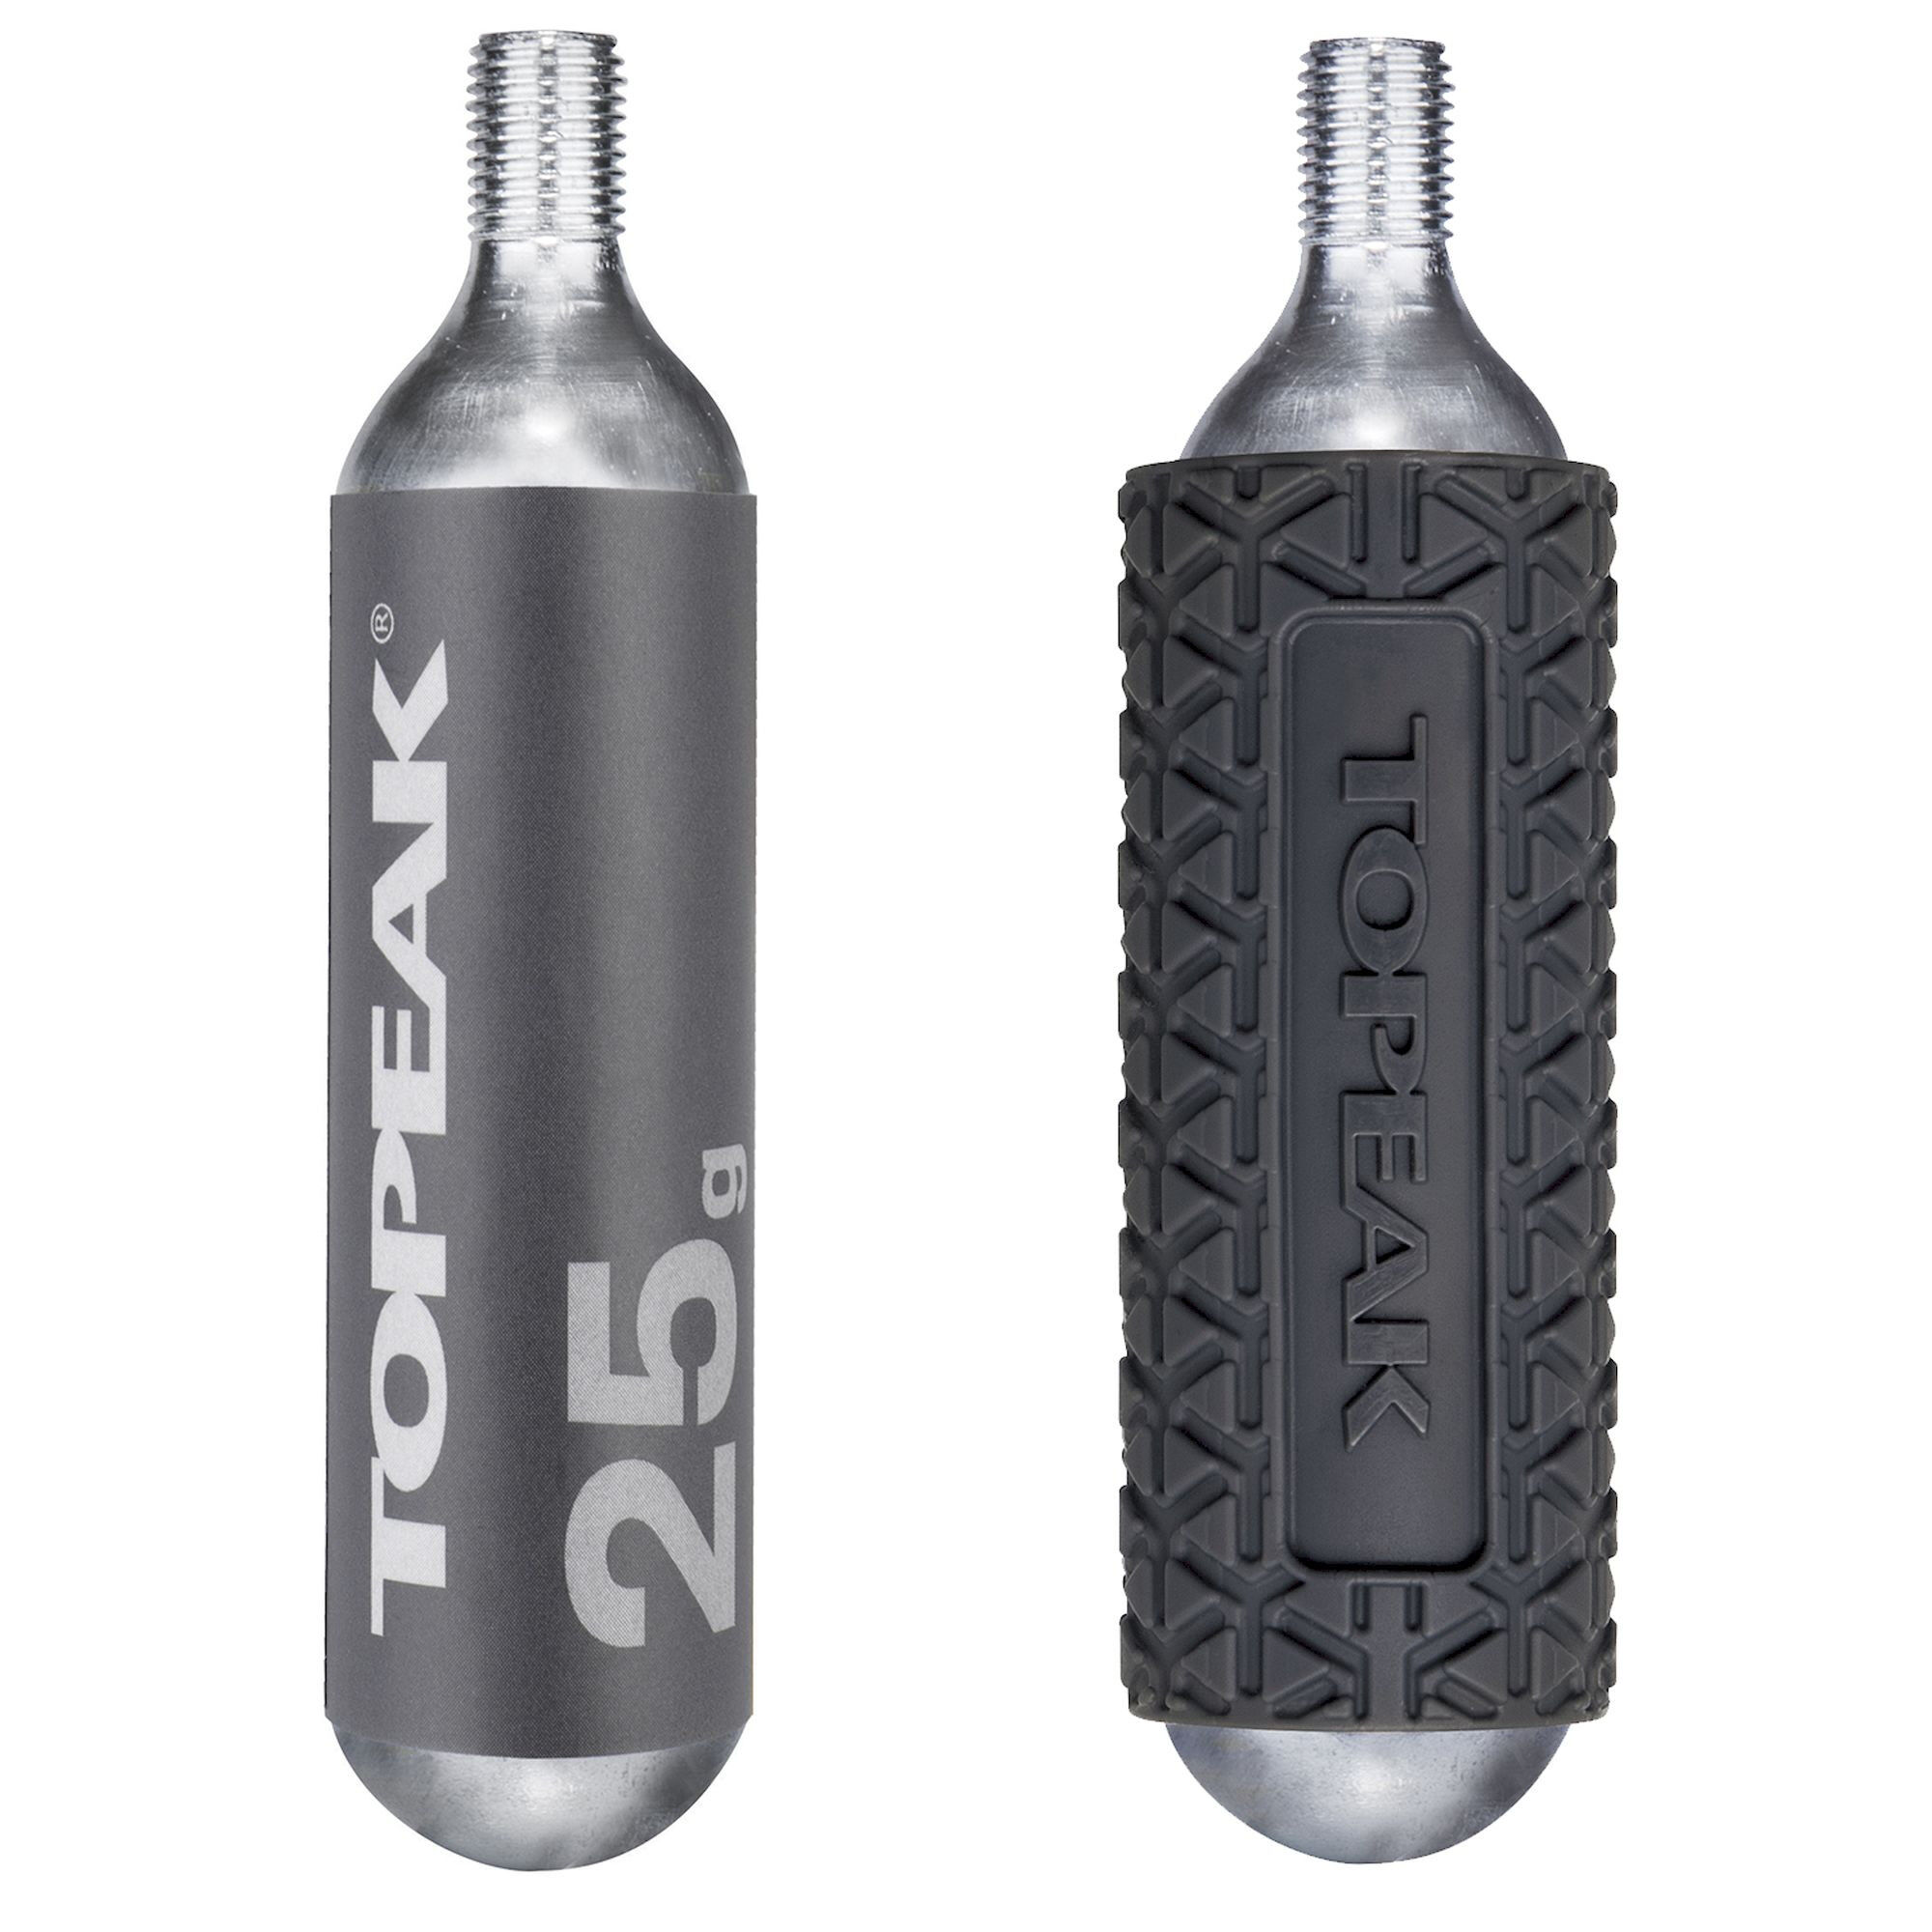 Topeak CO2 Cartridge 25g Threated (2 pieces w/ 1 cover) - Pompe CO2 | Hardloop